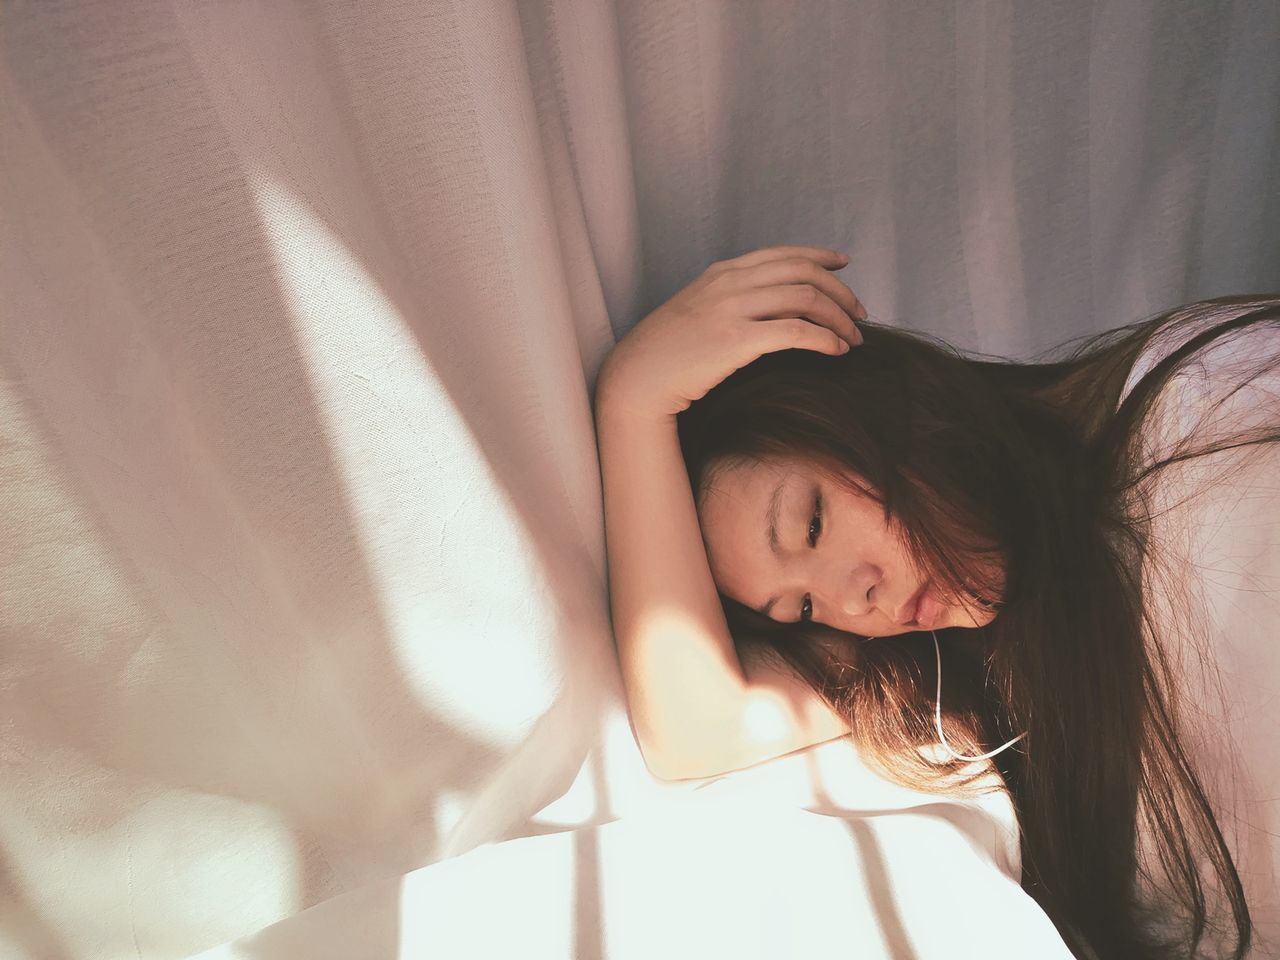 PORTRAIT OF YOUNG WOMAN SLEEPING IN BED